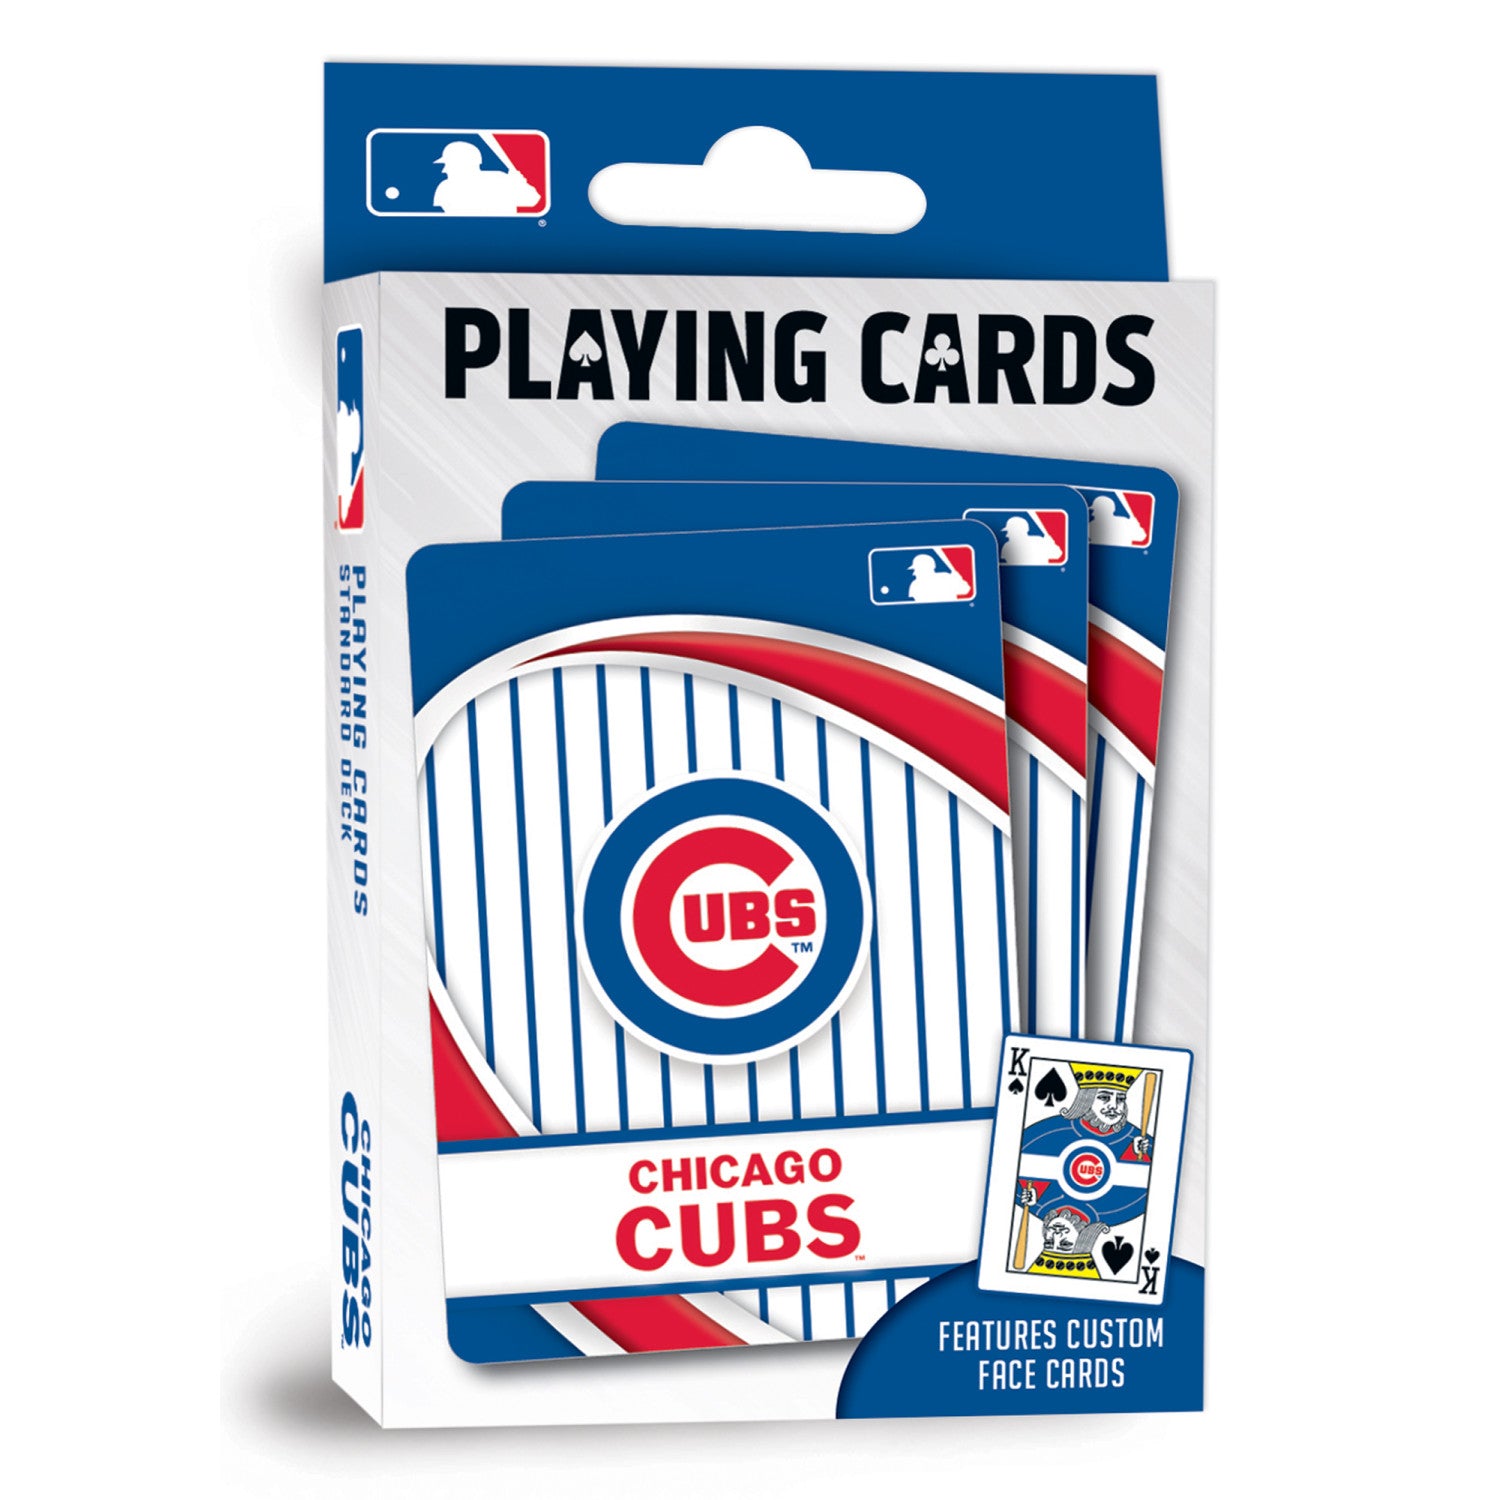 Chicago Cubs Playing Cards - 54 Card Deck